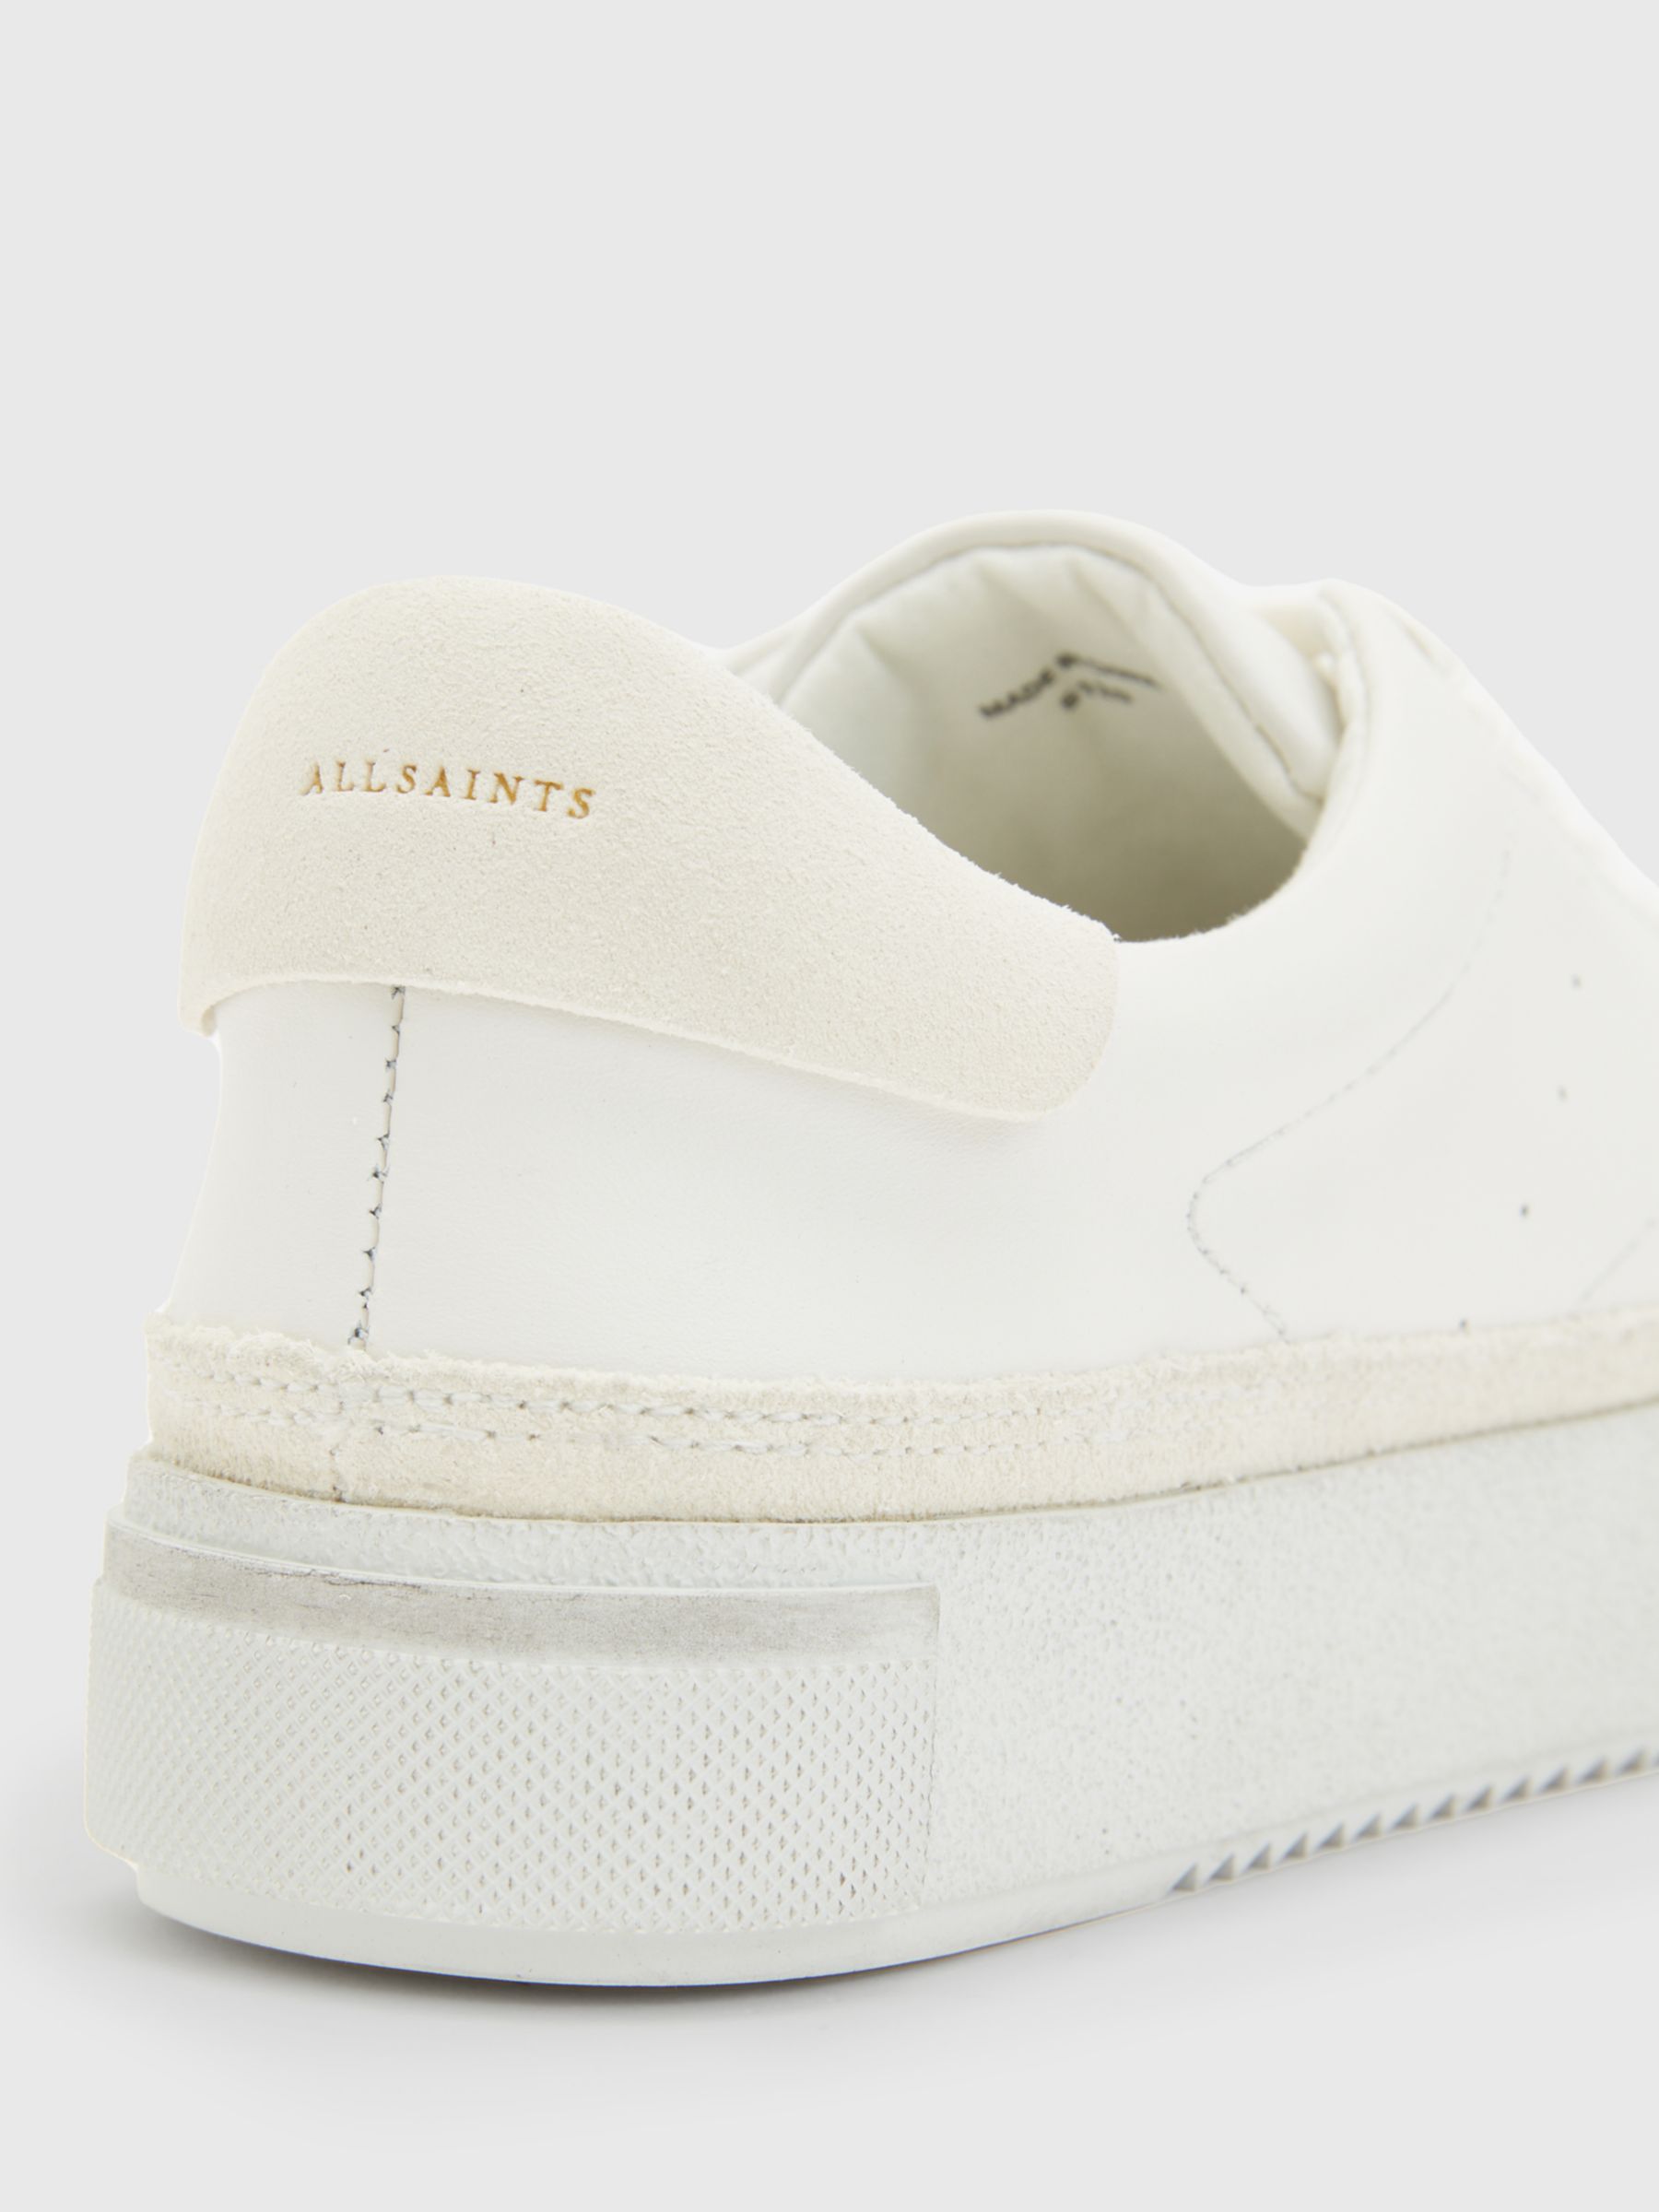 AllSaints Trish Leather Lace Up Trainers, Chalk White at John Lewis ...